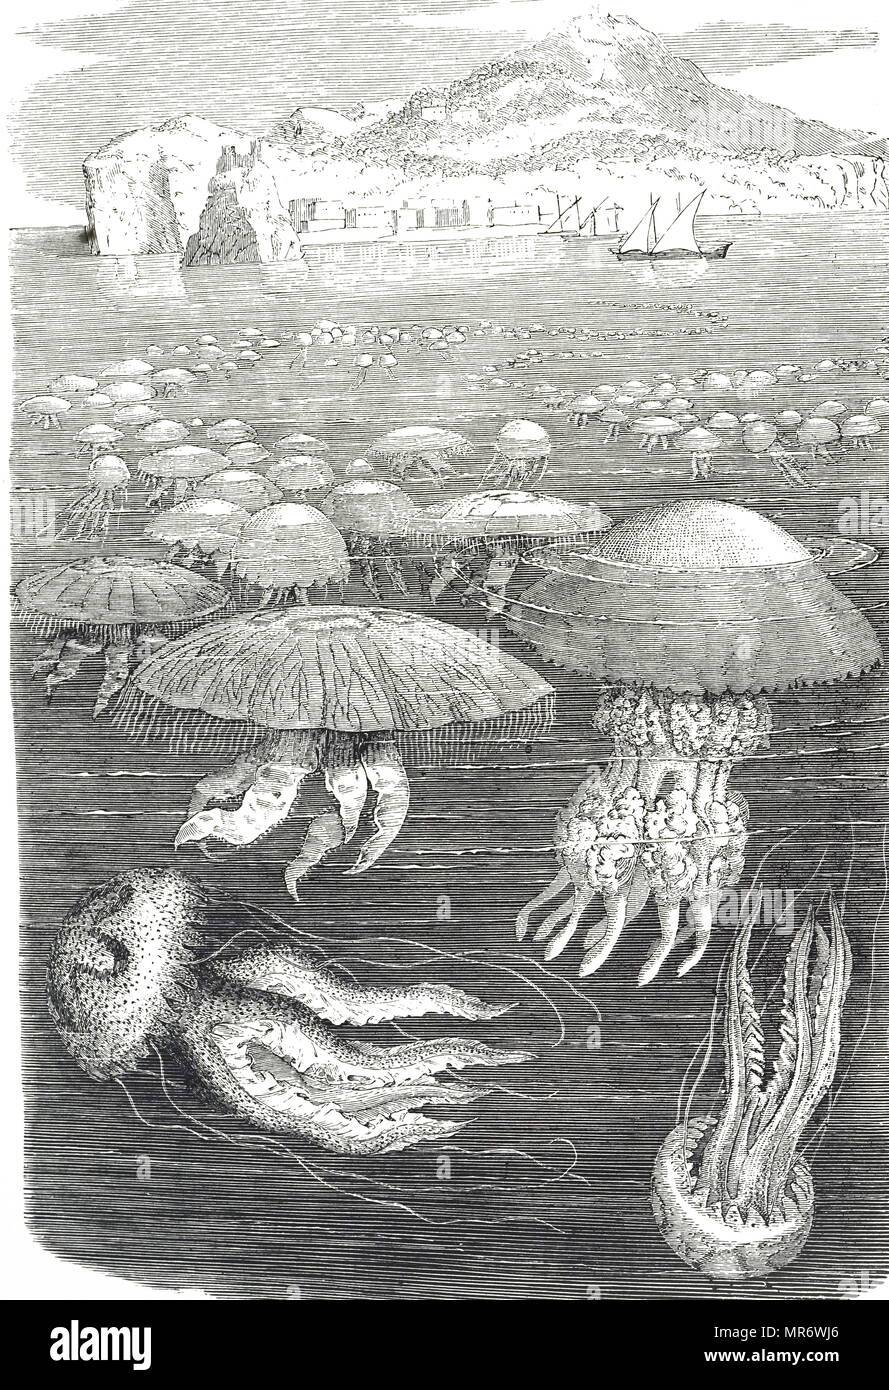 Engraving depicting jellyfish, a soft bodied, free-swimming aquatic animals with a gelatinous umbrella-shaped bell and trailing tentacles. The bell can pulsate to acquire propulsion and locomotion. Dated 19th century Stock Photo